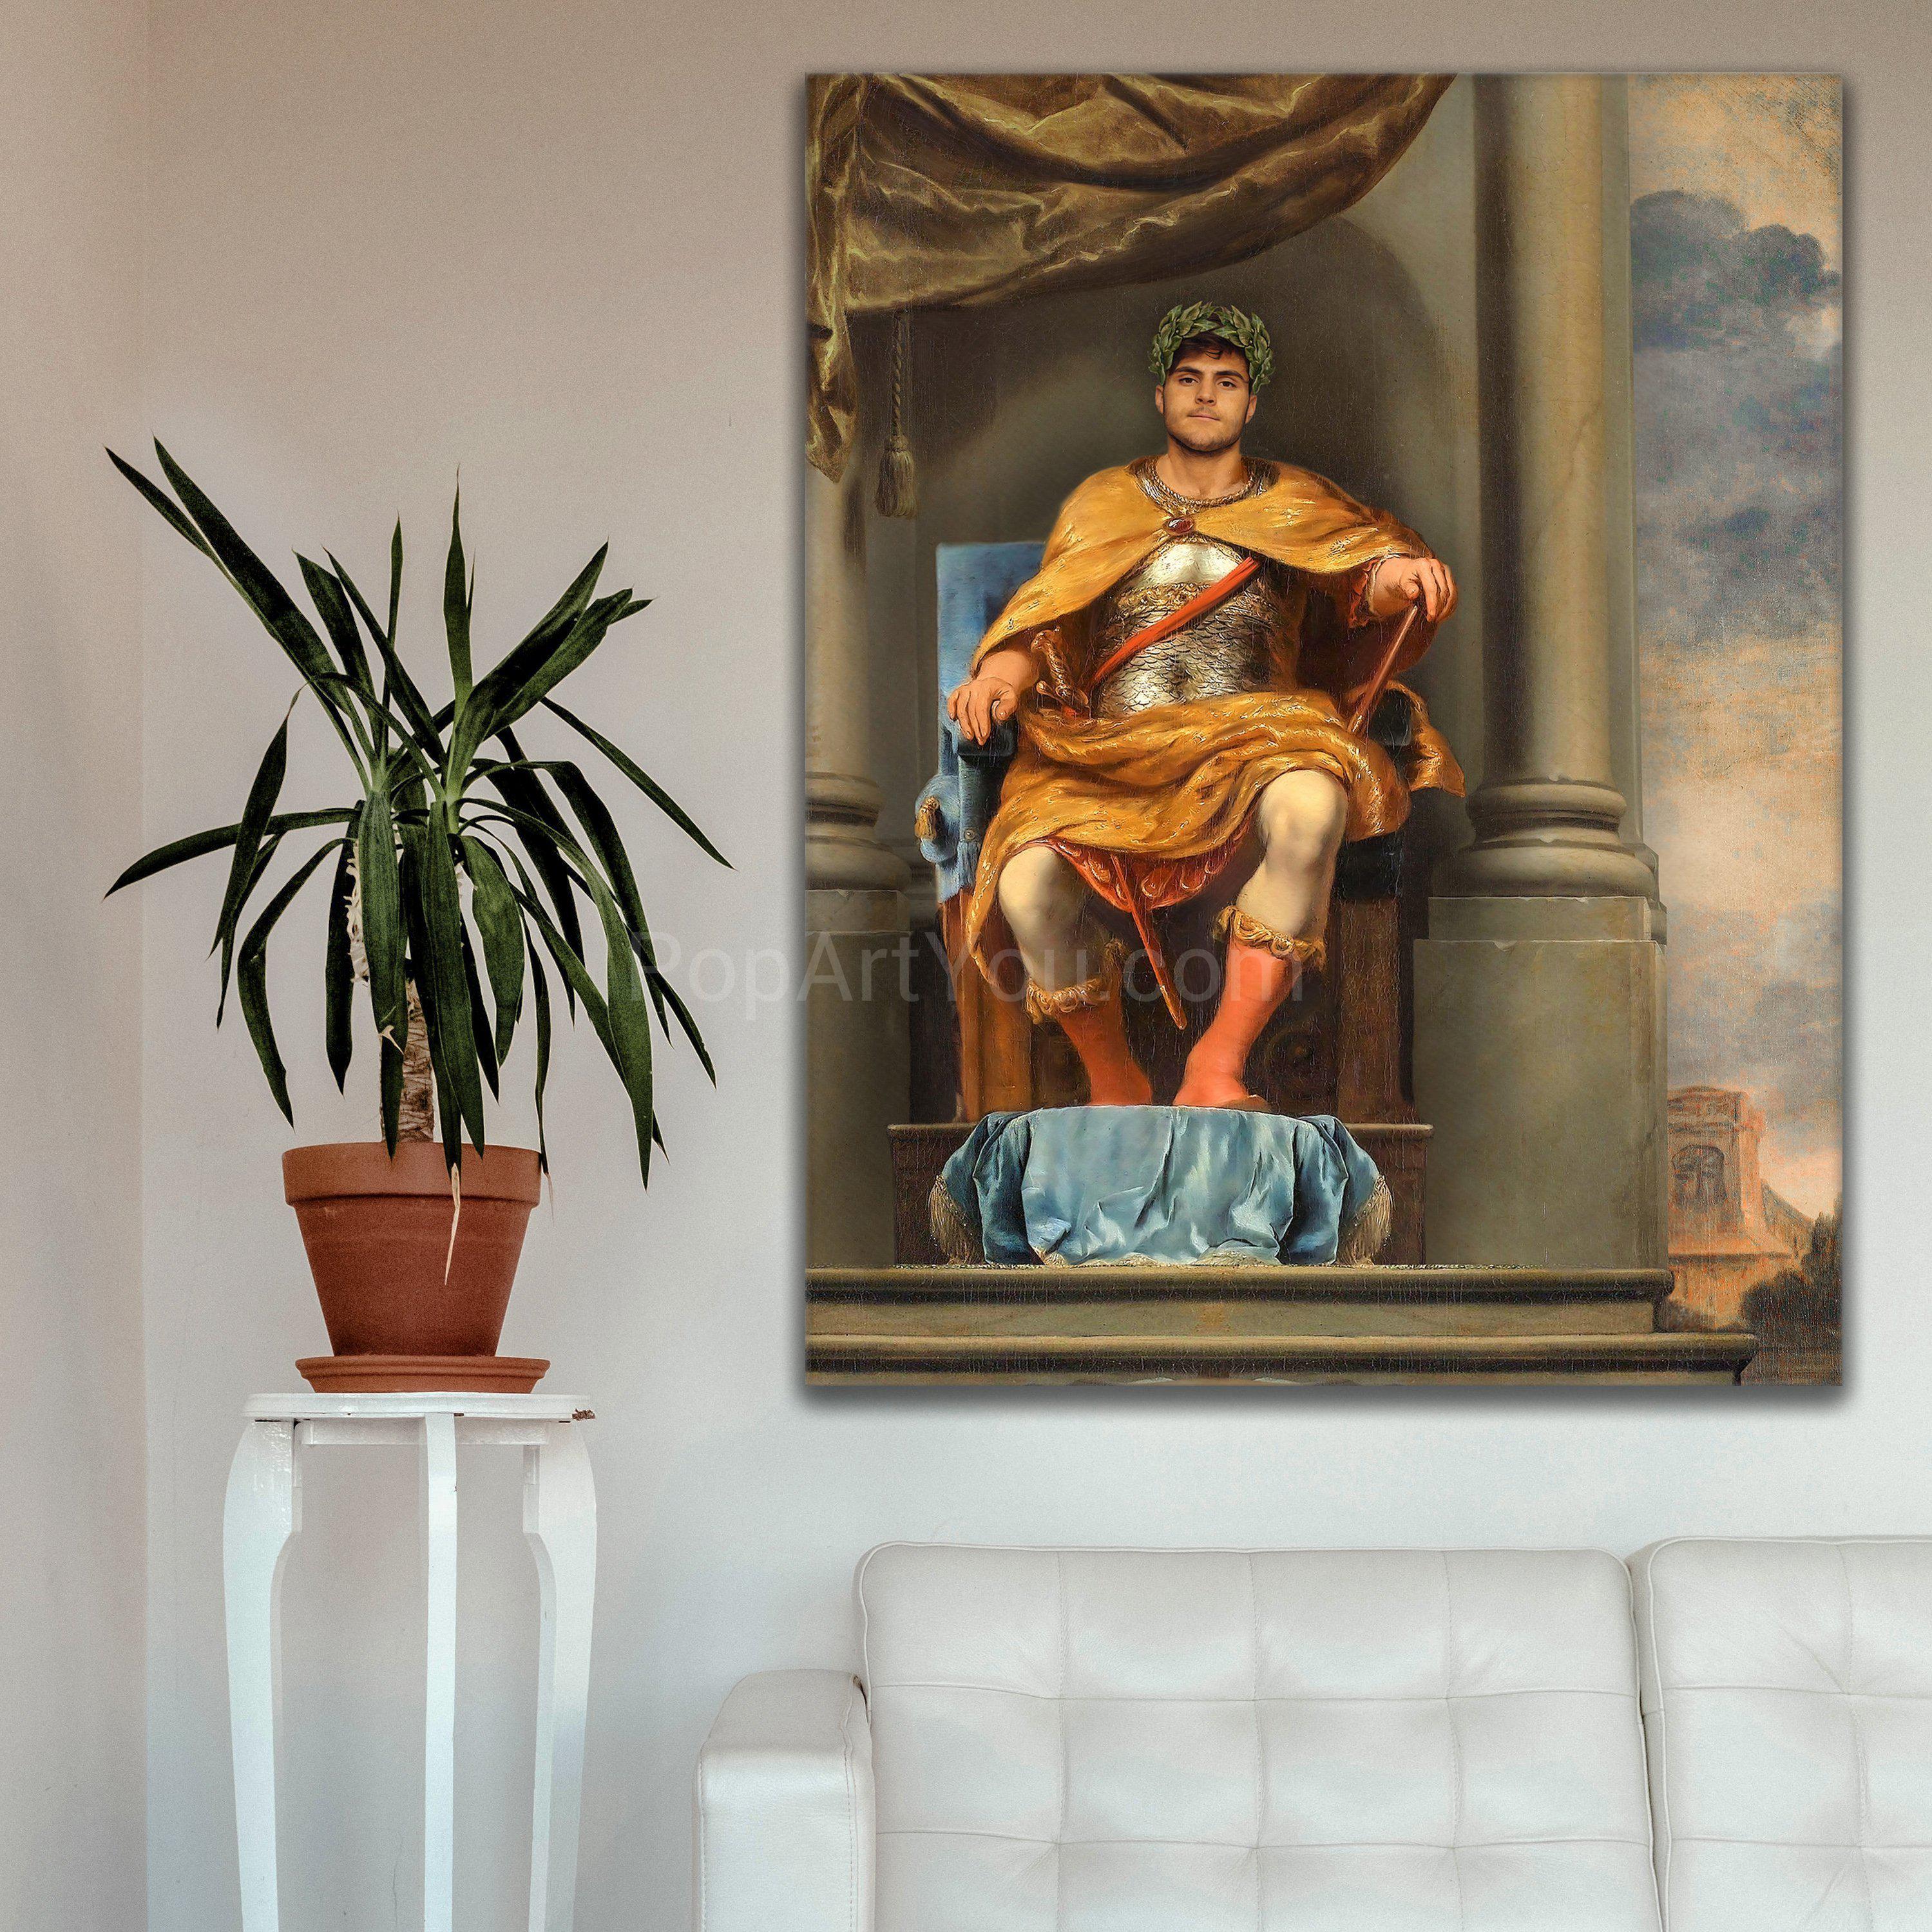 A portrait of a man dressed in gold Greek clothes sitting on a throne hangs on the white wall above the sofa